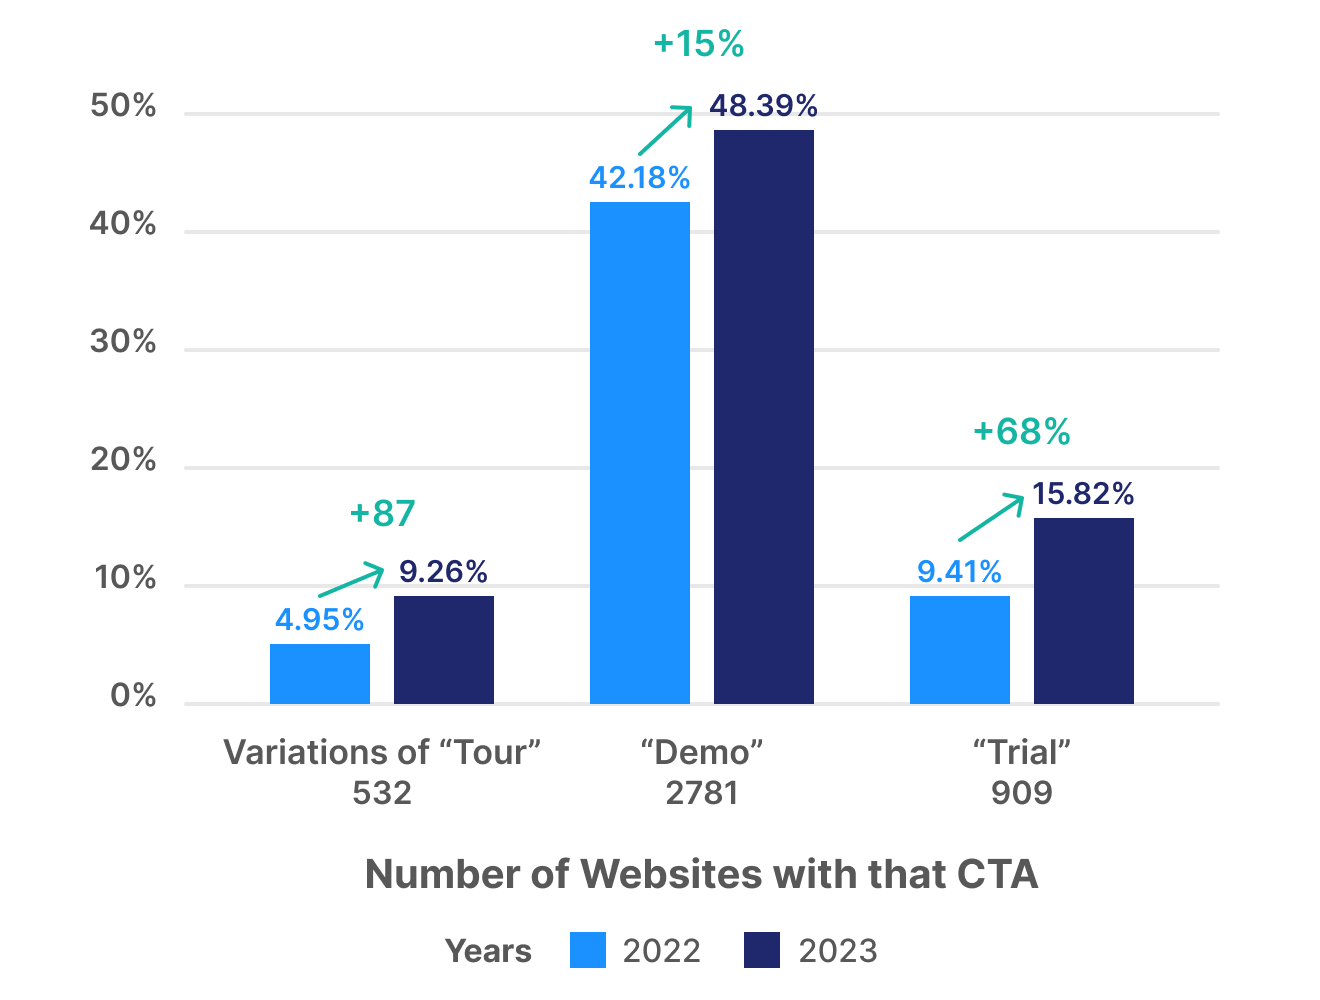 Comparing B2B SaaS website CTAs from last year to this year